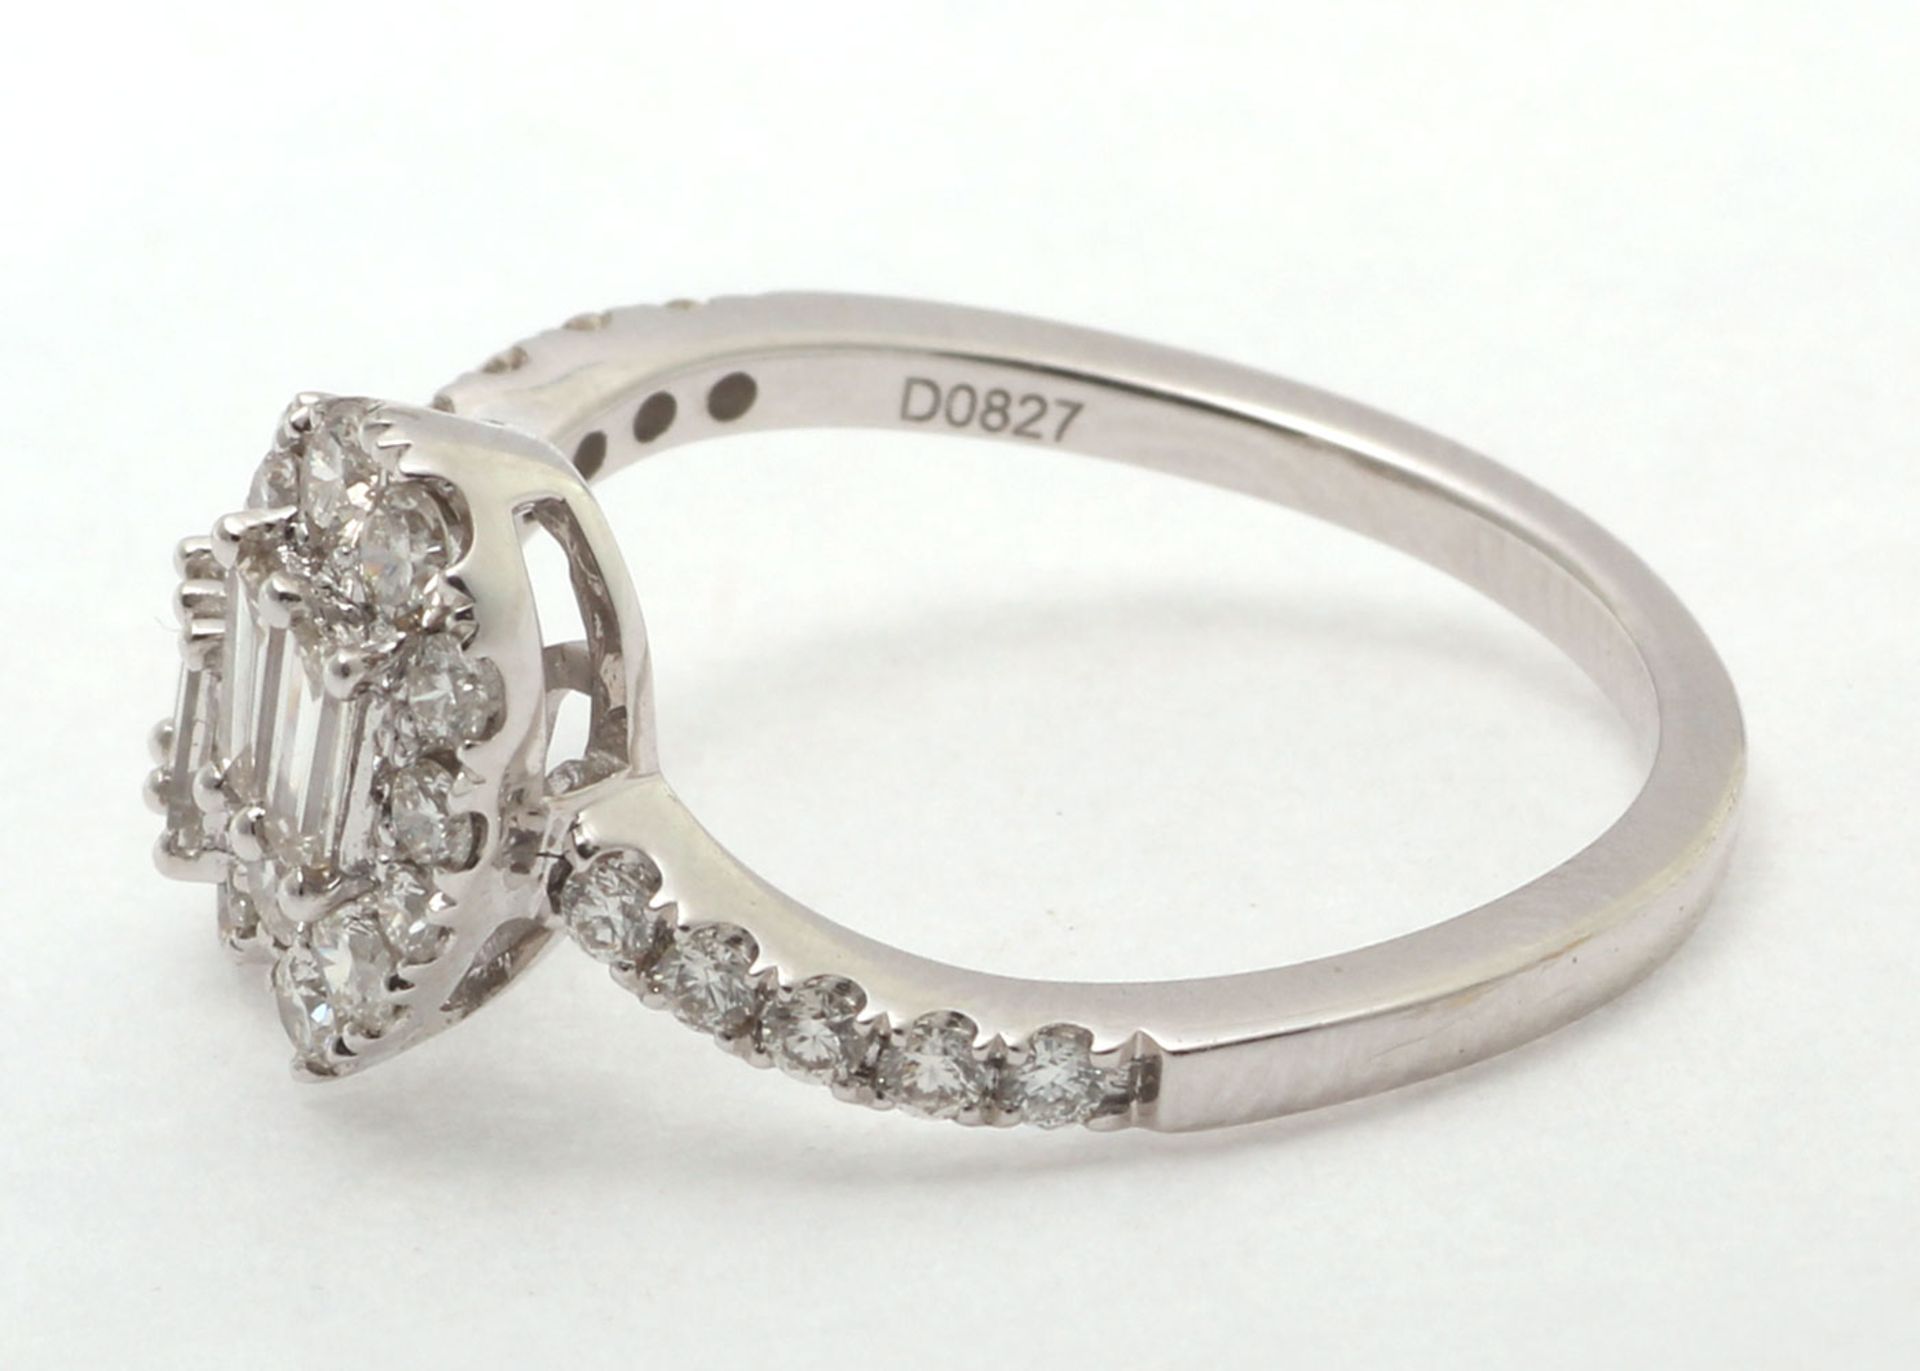 Valued by GIE £12,955.00 - 18ct White Gold Double Pear Shape Cluster Diamond Ring 0.83 Carats - - Image 2 of 5